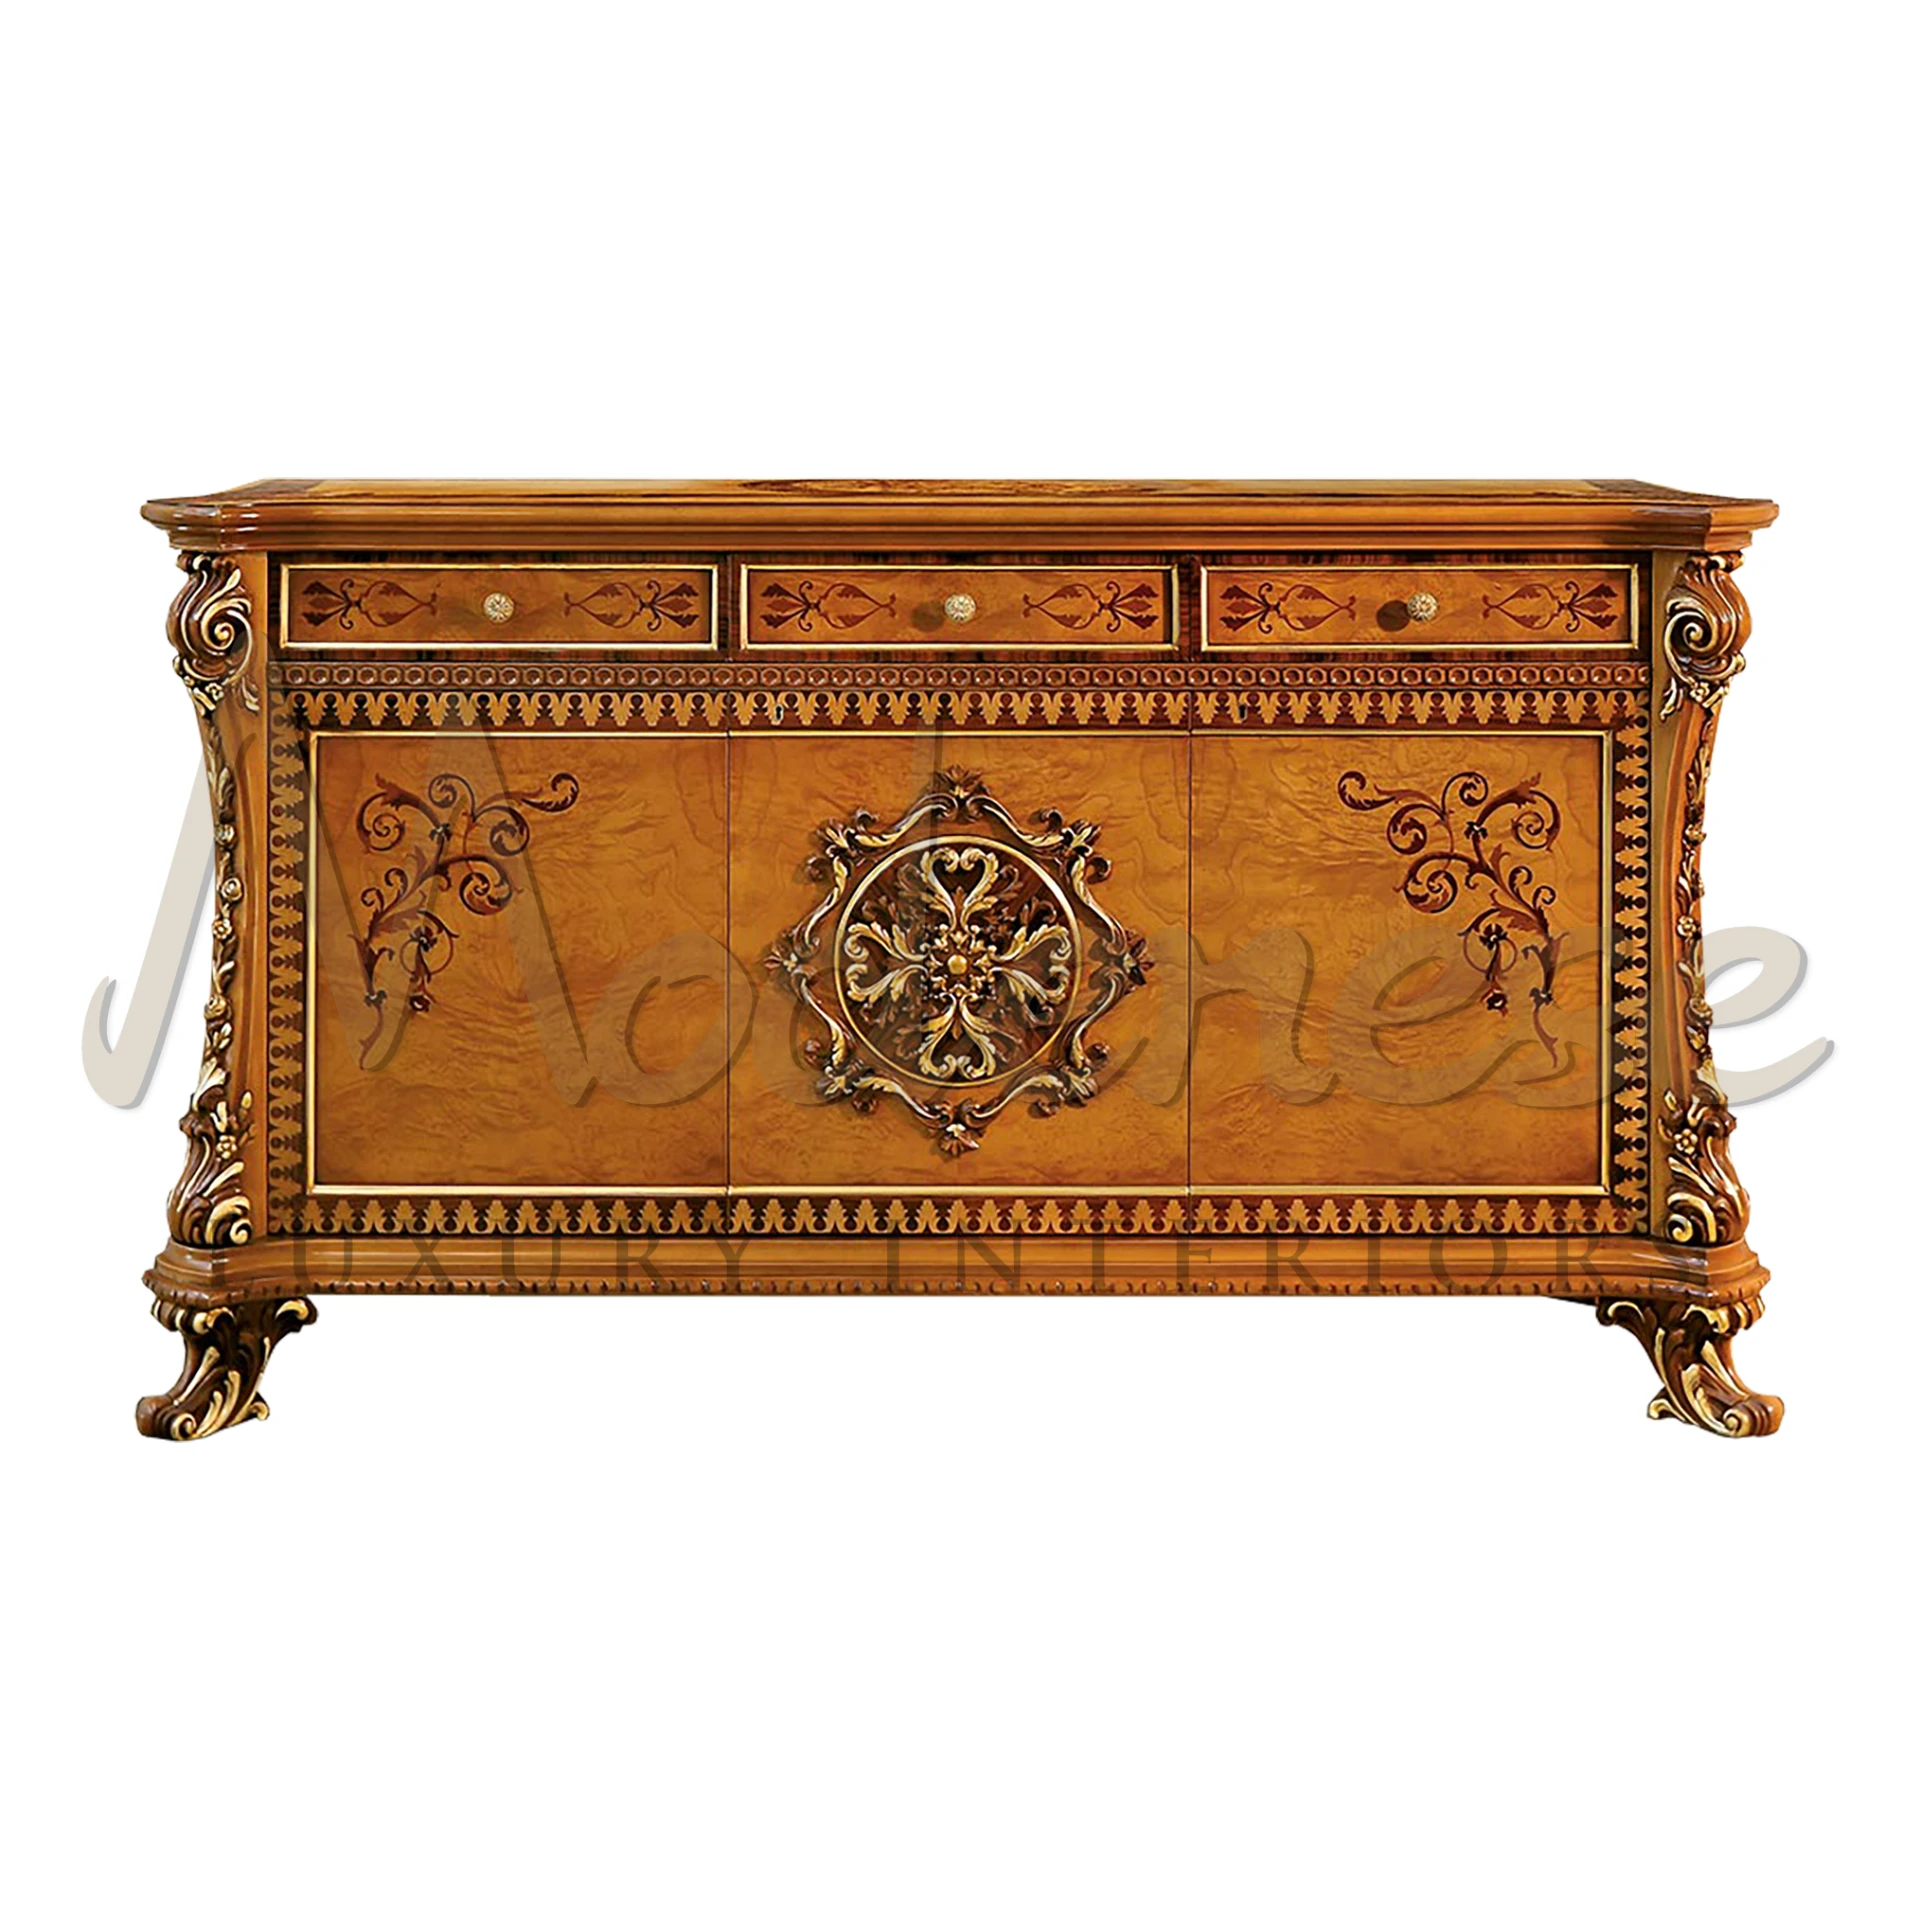 Elegant solid wood sideboard with intricate inlay and finely carved details. Features three drawers and three doors, perfect for any living space.